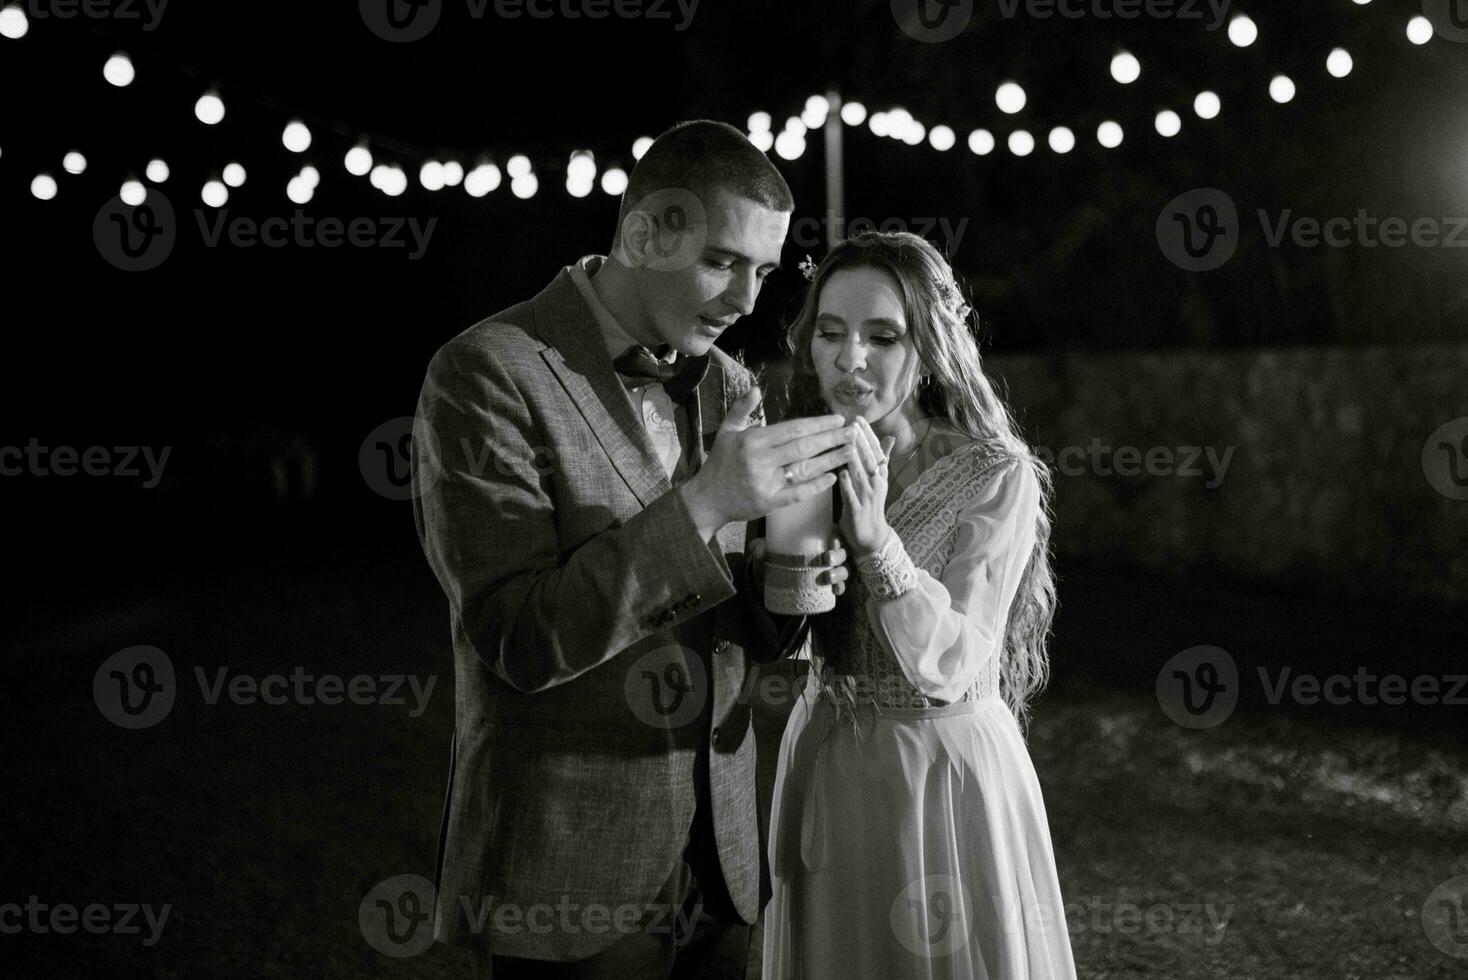 transfer of wedding fire with the help of candles the newlyweds photo